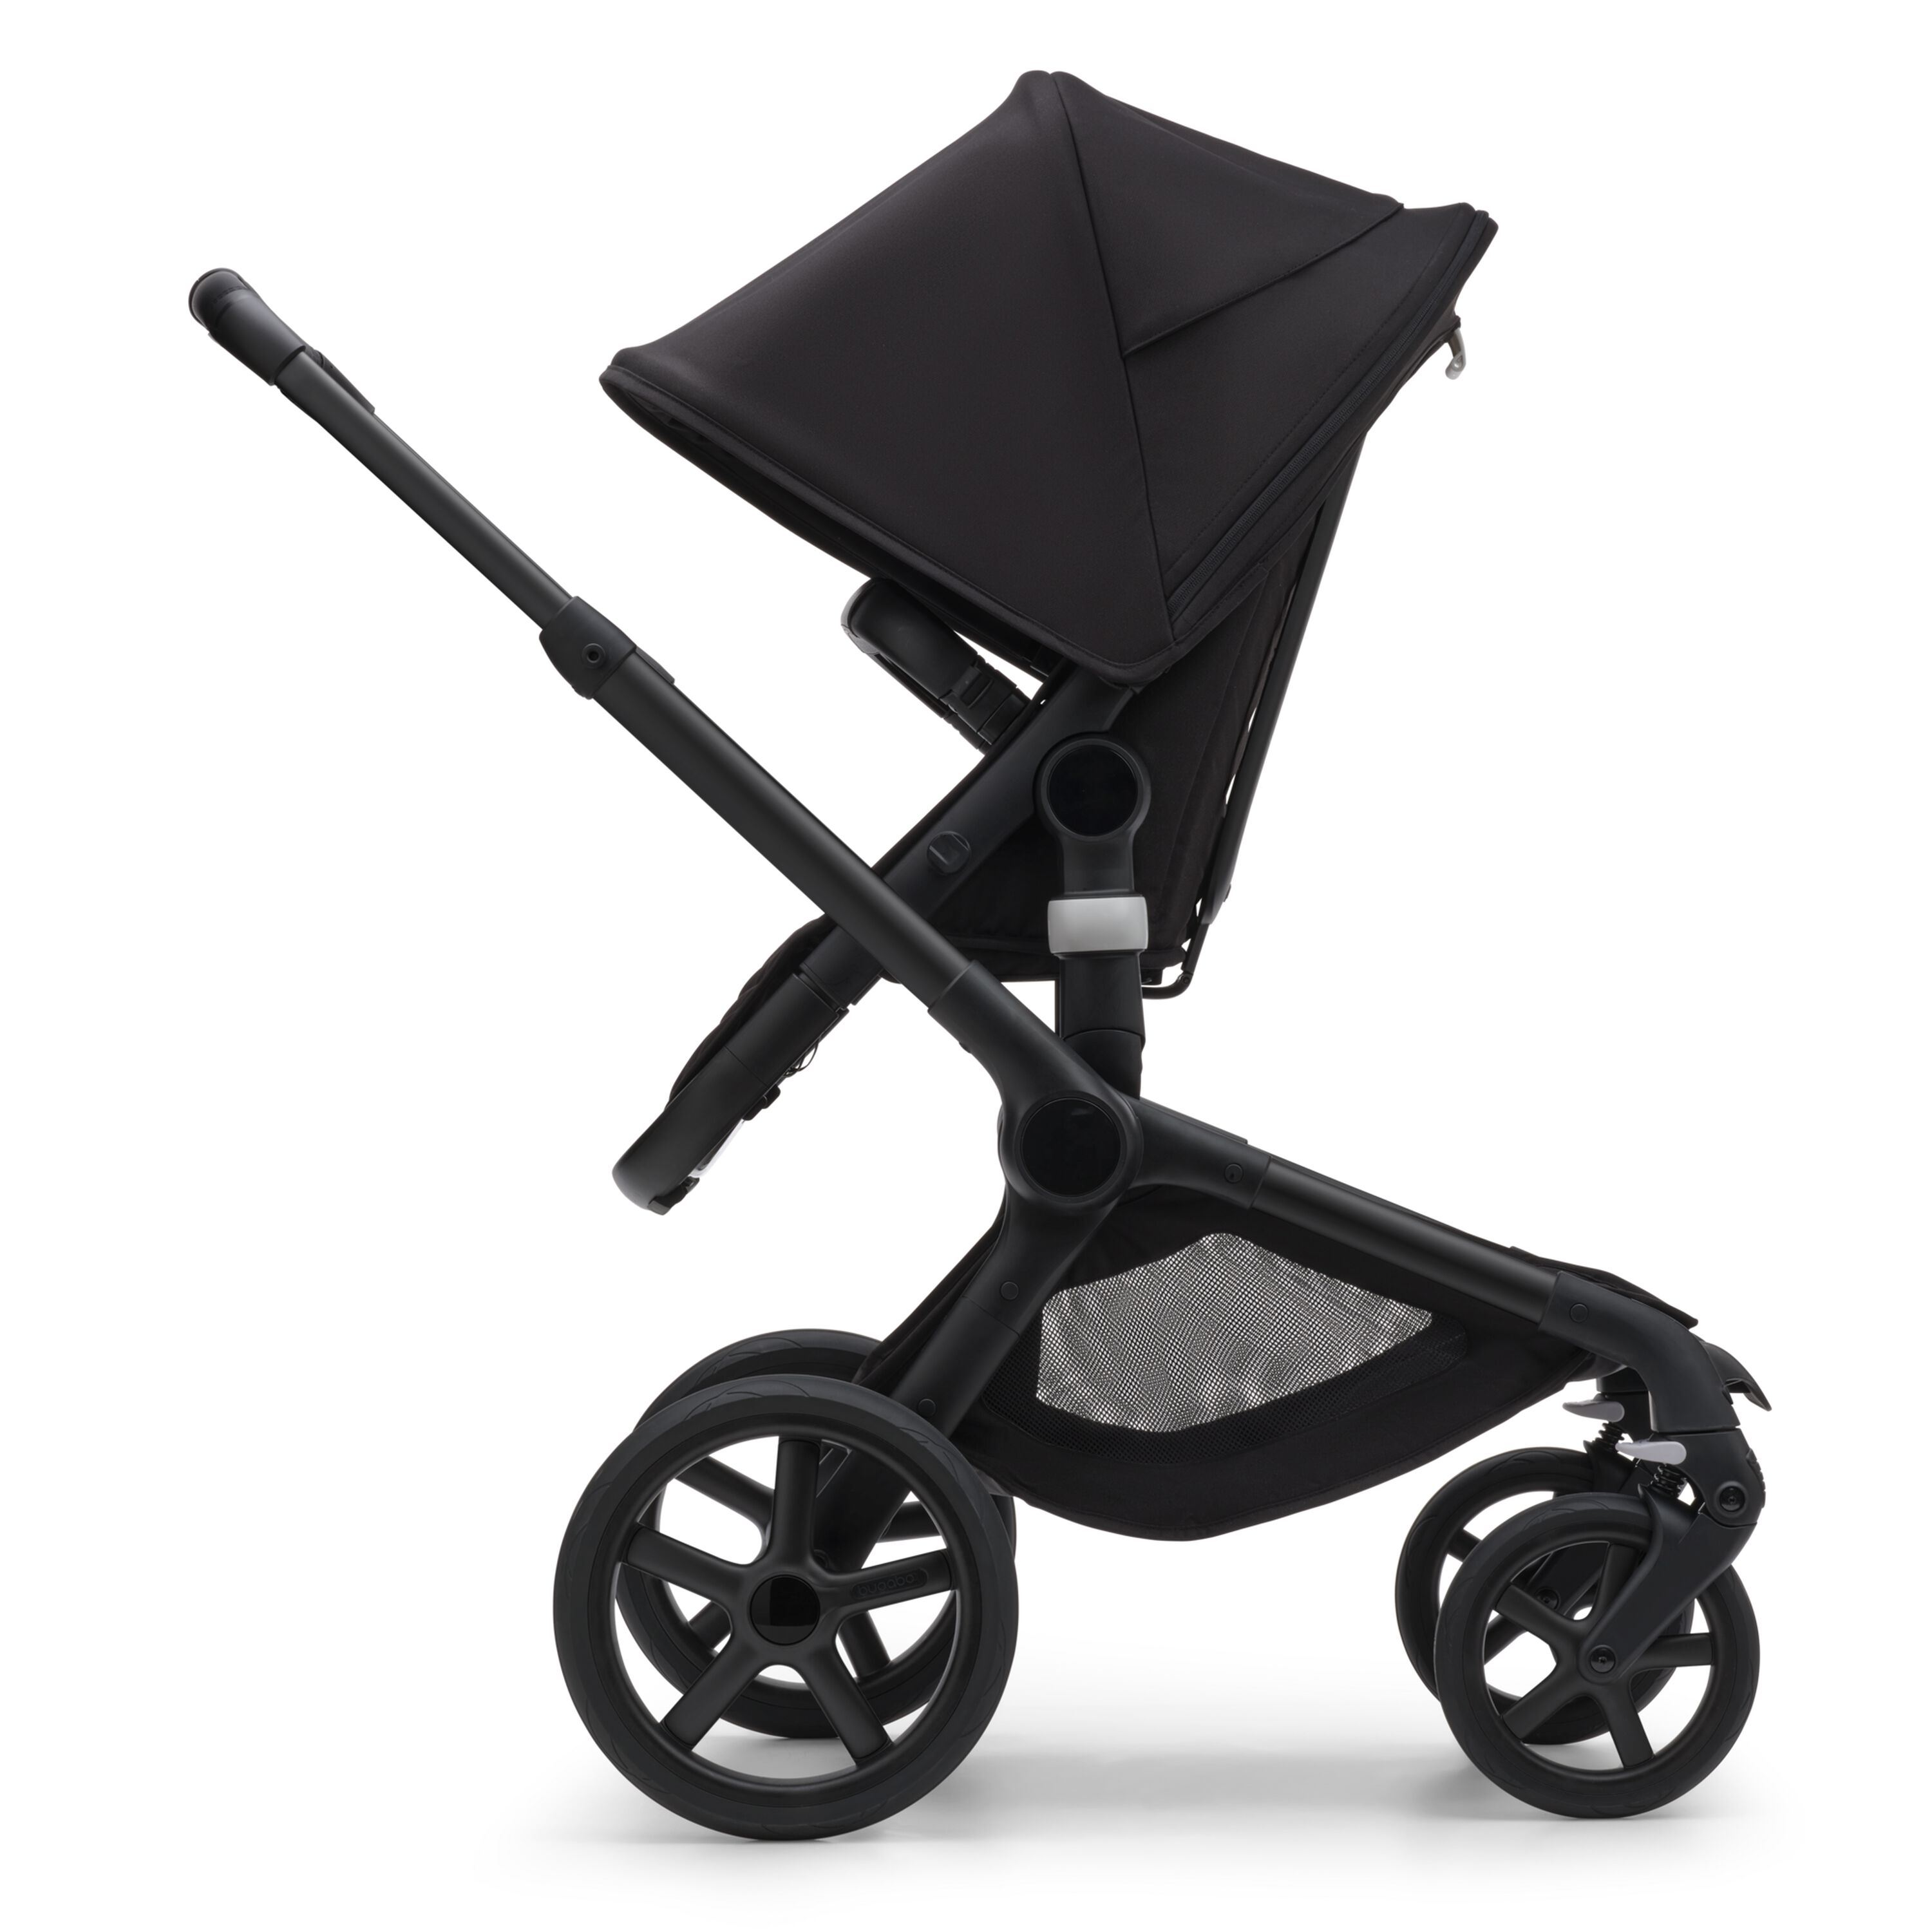 Bugaboo Fox 5: What to know before buying